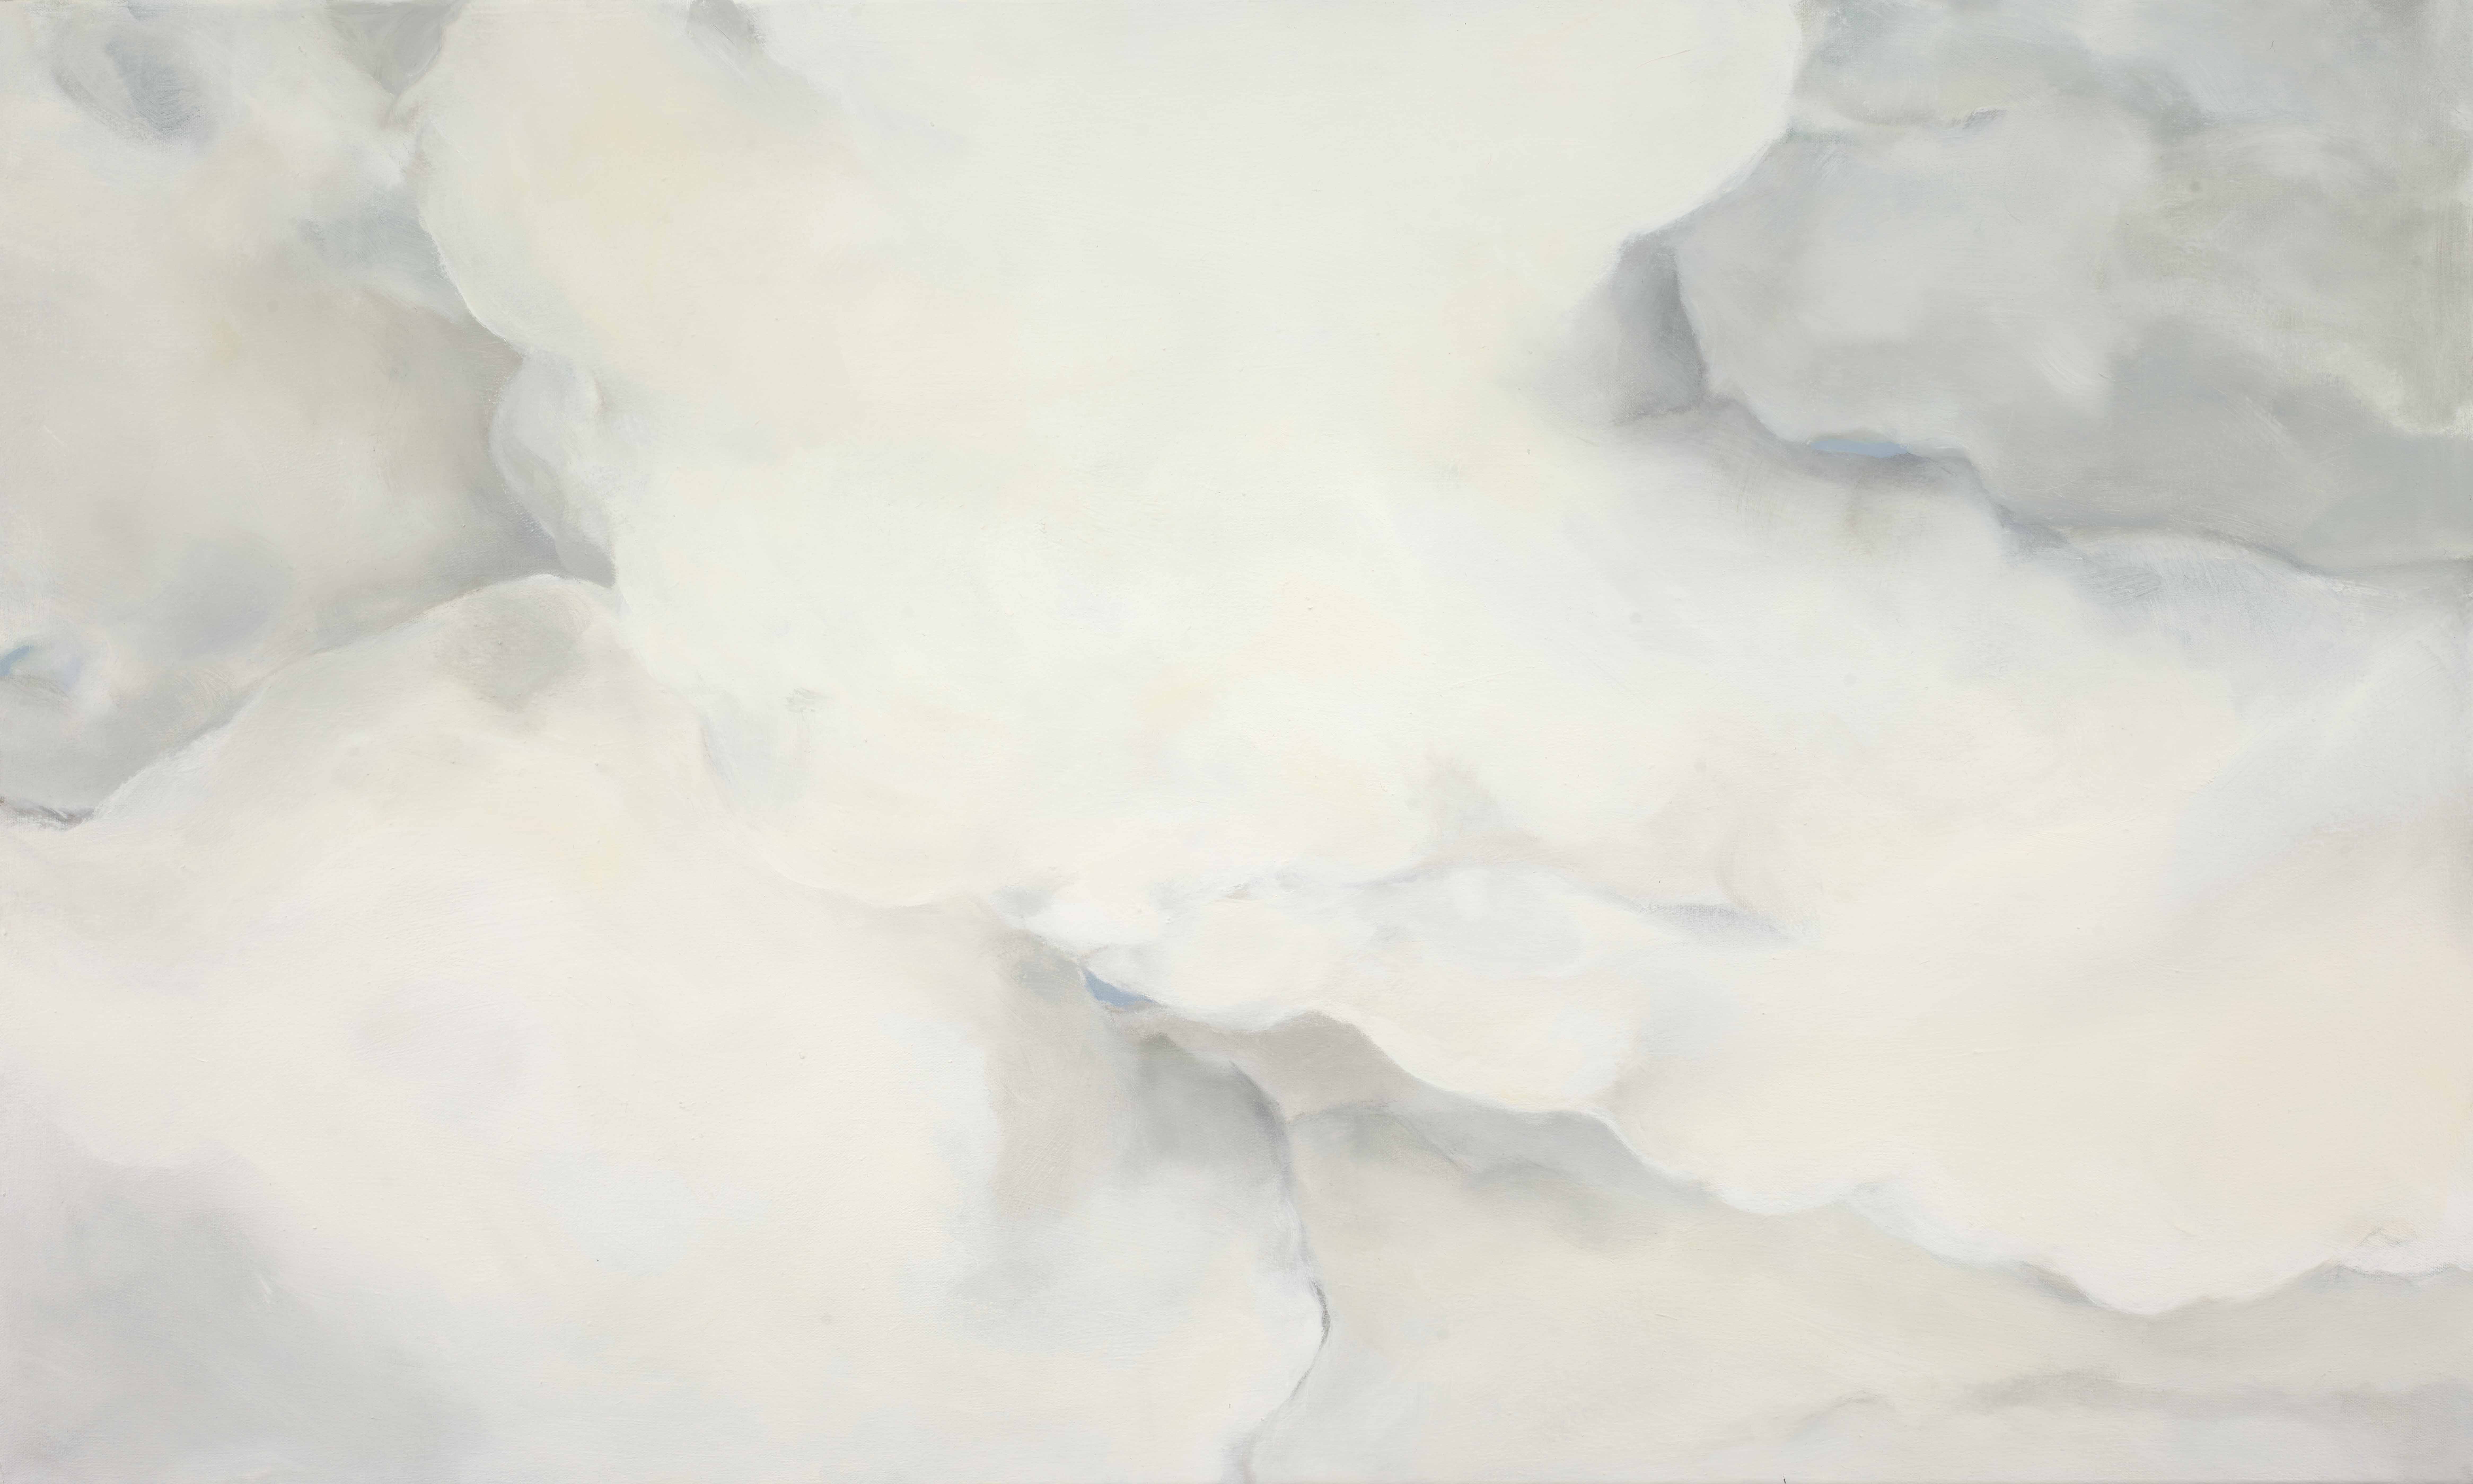 Moving Through, 2023, oil on canvas, 24x40 inches